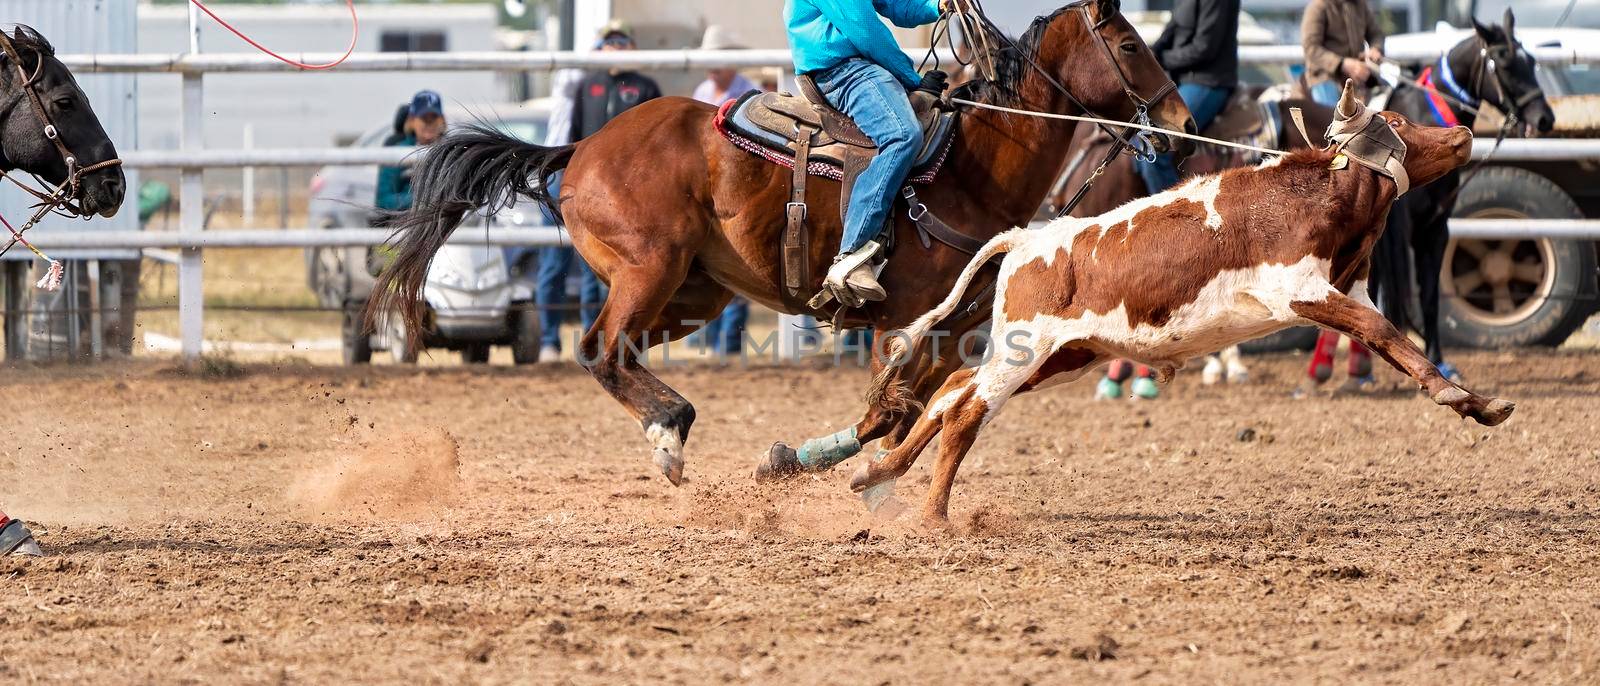 Calf Roping At Country Rodeo by 	JacksonStock